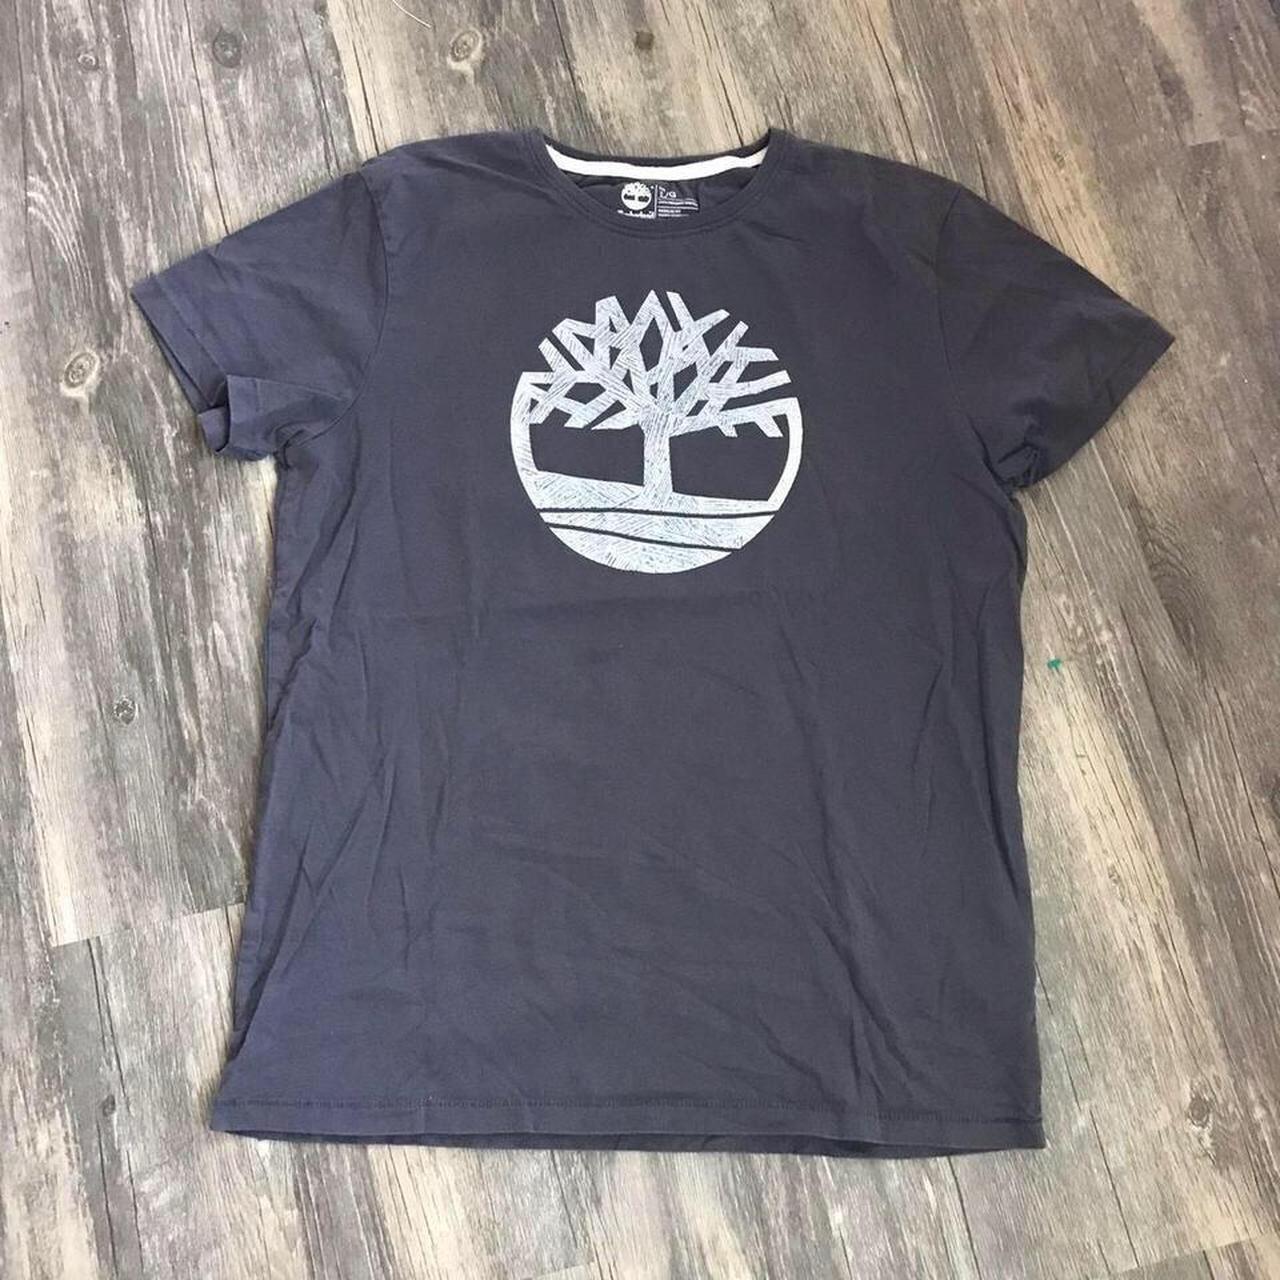 Timberland Outdoors Graphic Tee Hunting and Fishing - Depop